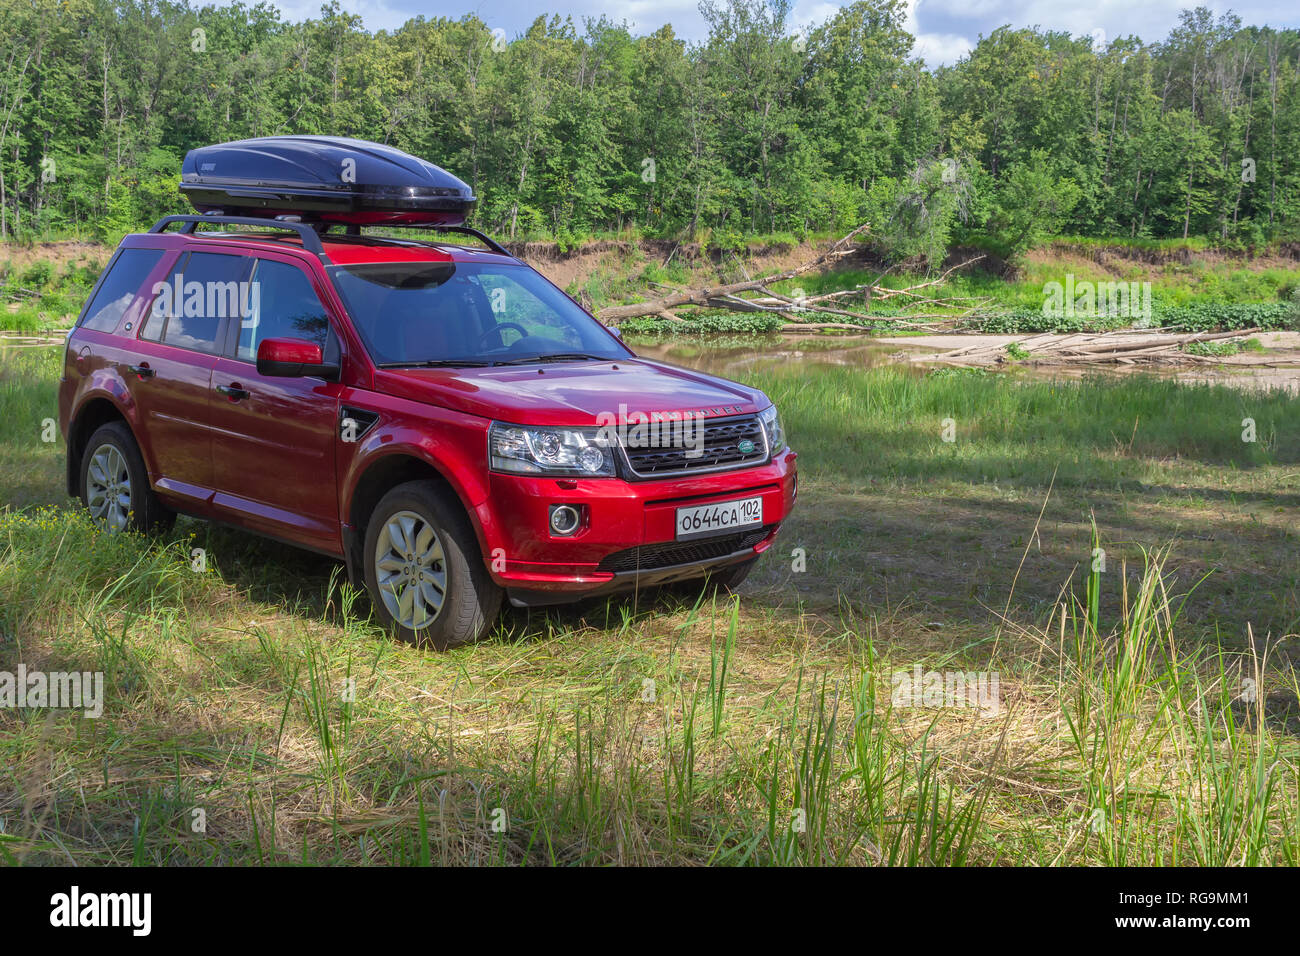 Land Rover Freelander 2 High Resolution Stock Photography And Images Alamy